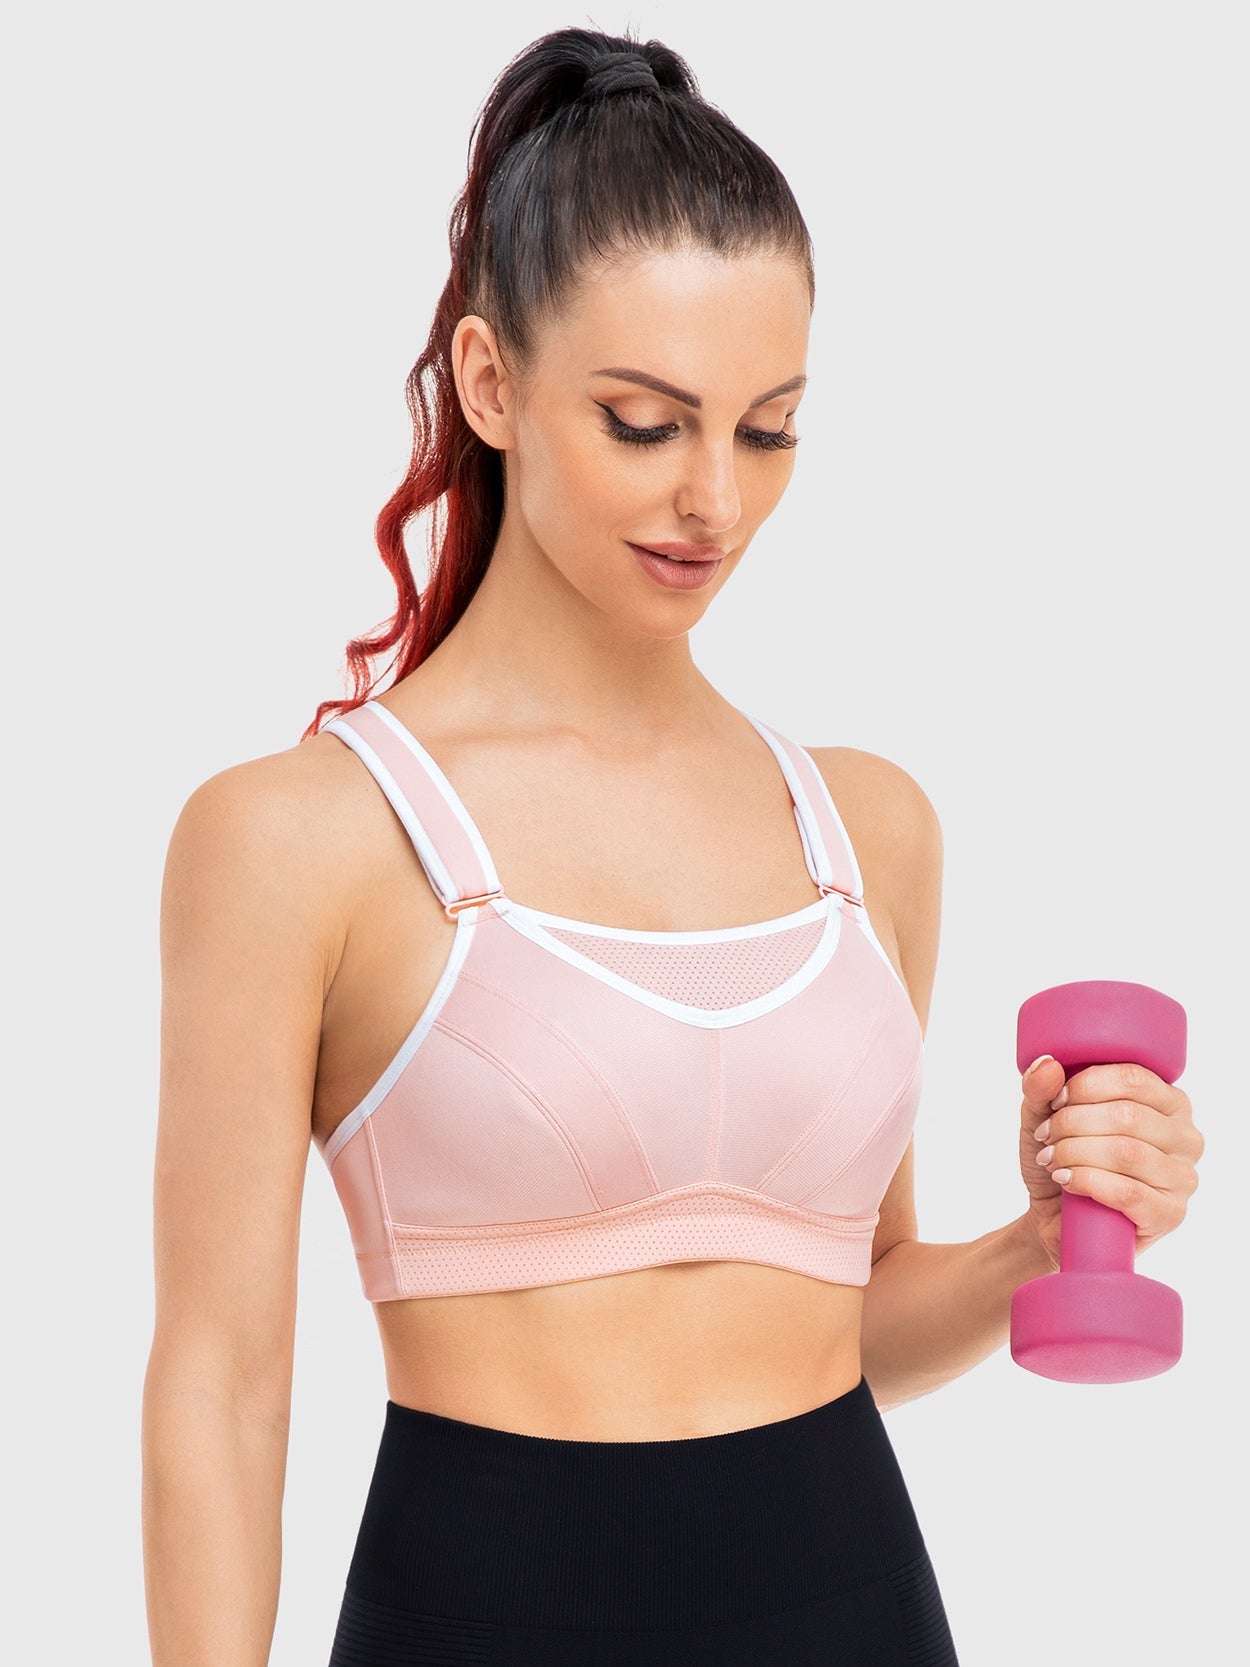 Bras Wingslove Hight Impact Hook And Loop Fasterner Straps Sport Bra  Racerback Shockproof Gym Fitness Athletic Brassiere Plus Sizes YQ231101  From 18,45 €